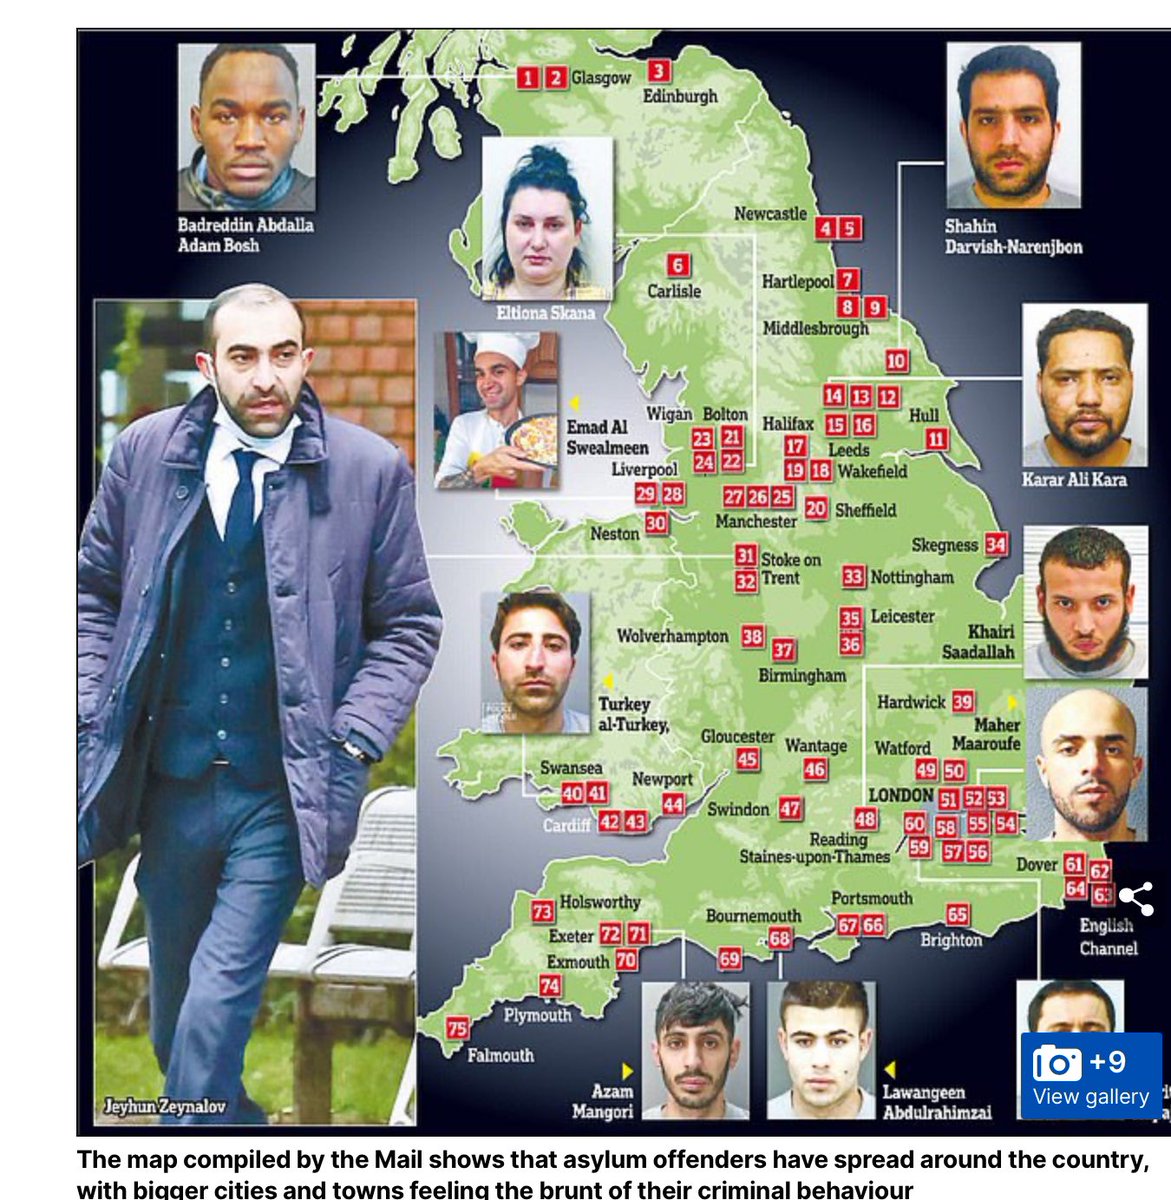 75 men and 2 women sought asylum in the UK and then went on to rape, kill, abuse people in the country. Some of these people had a criminal record before they even arrived in the country - including raping children overseas. How is this allowed?